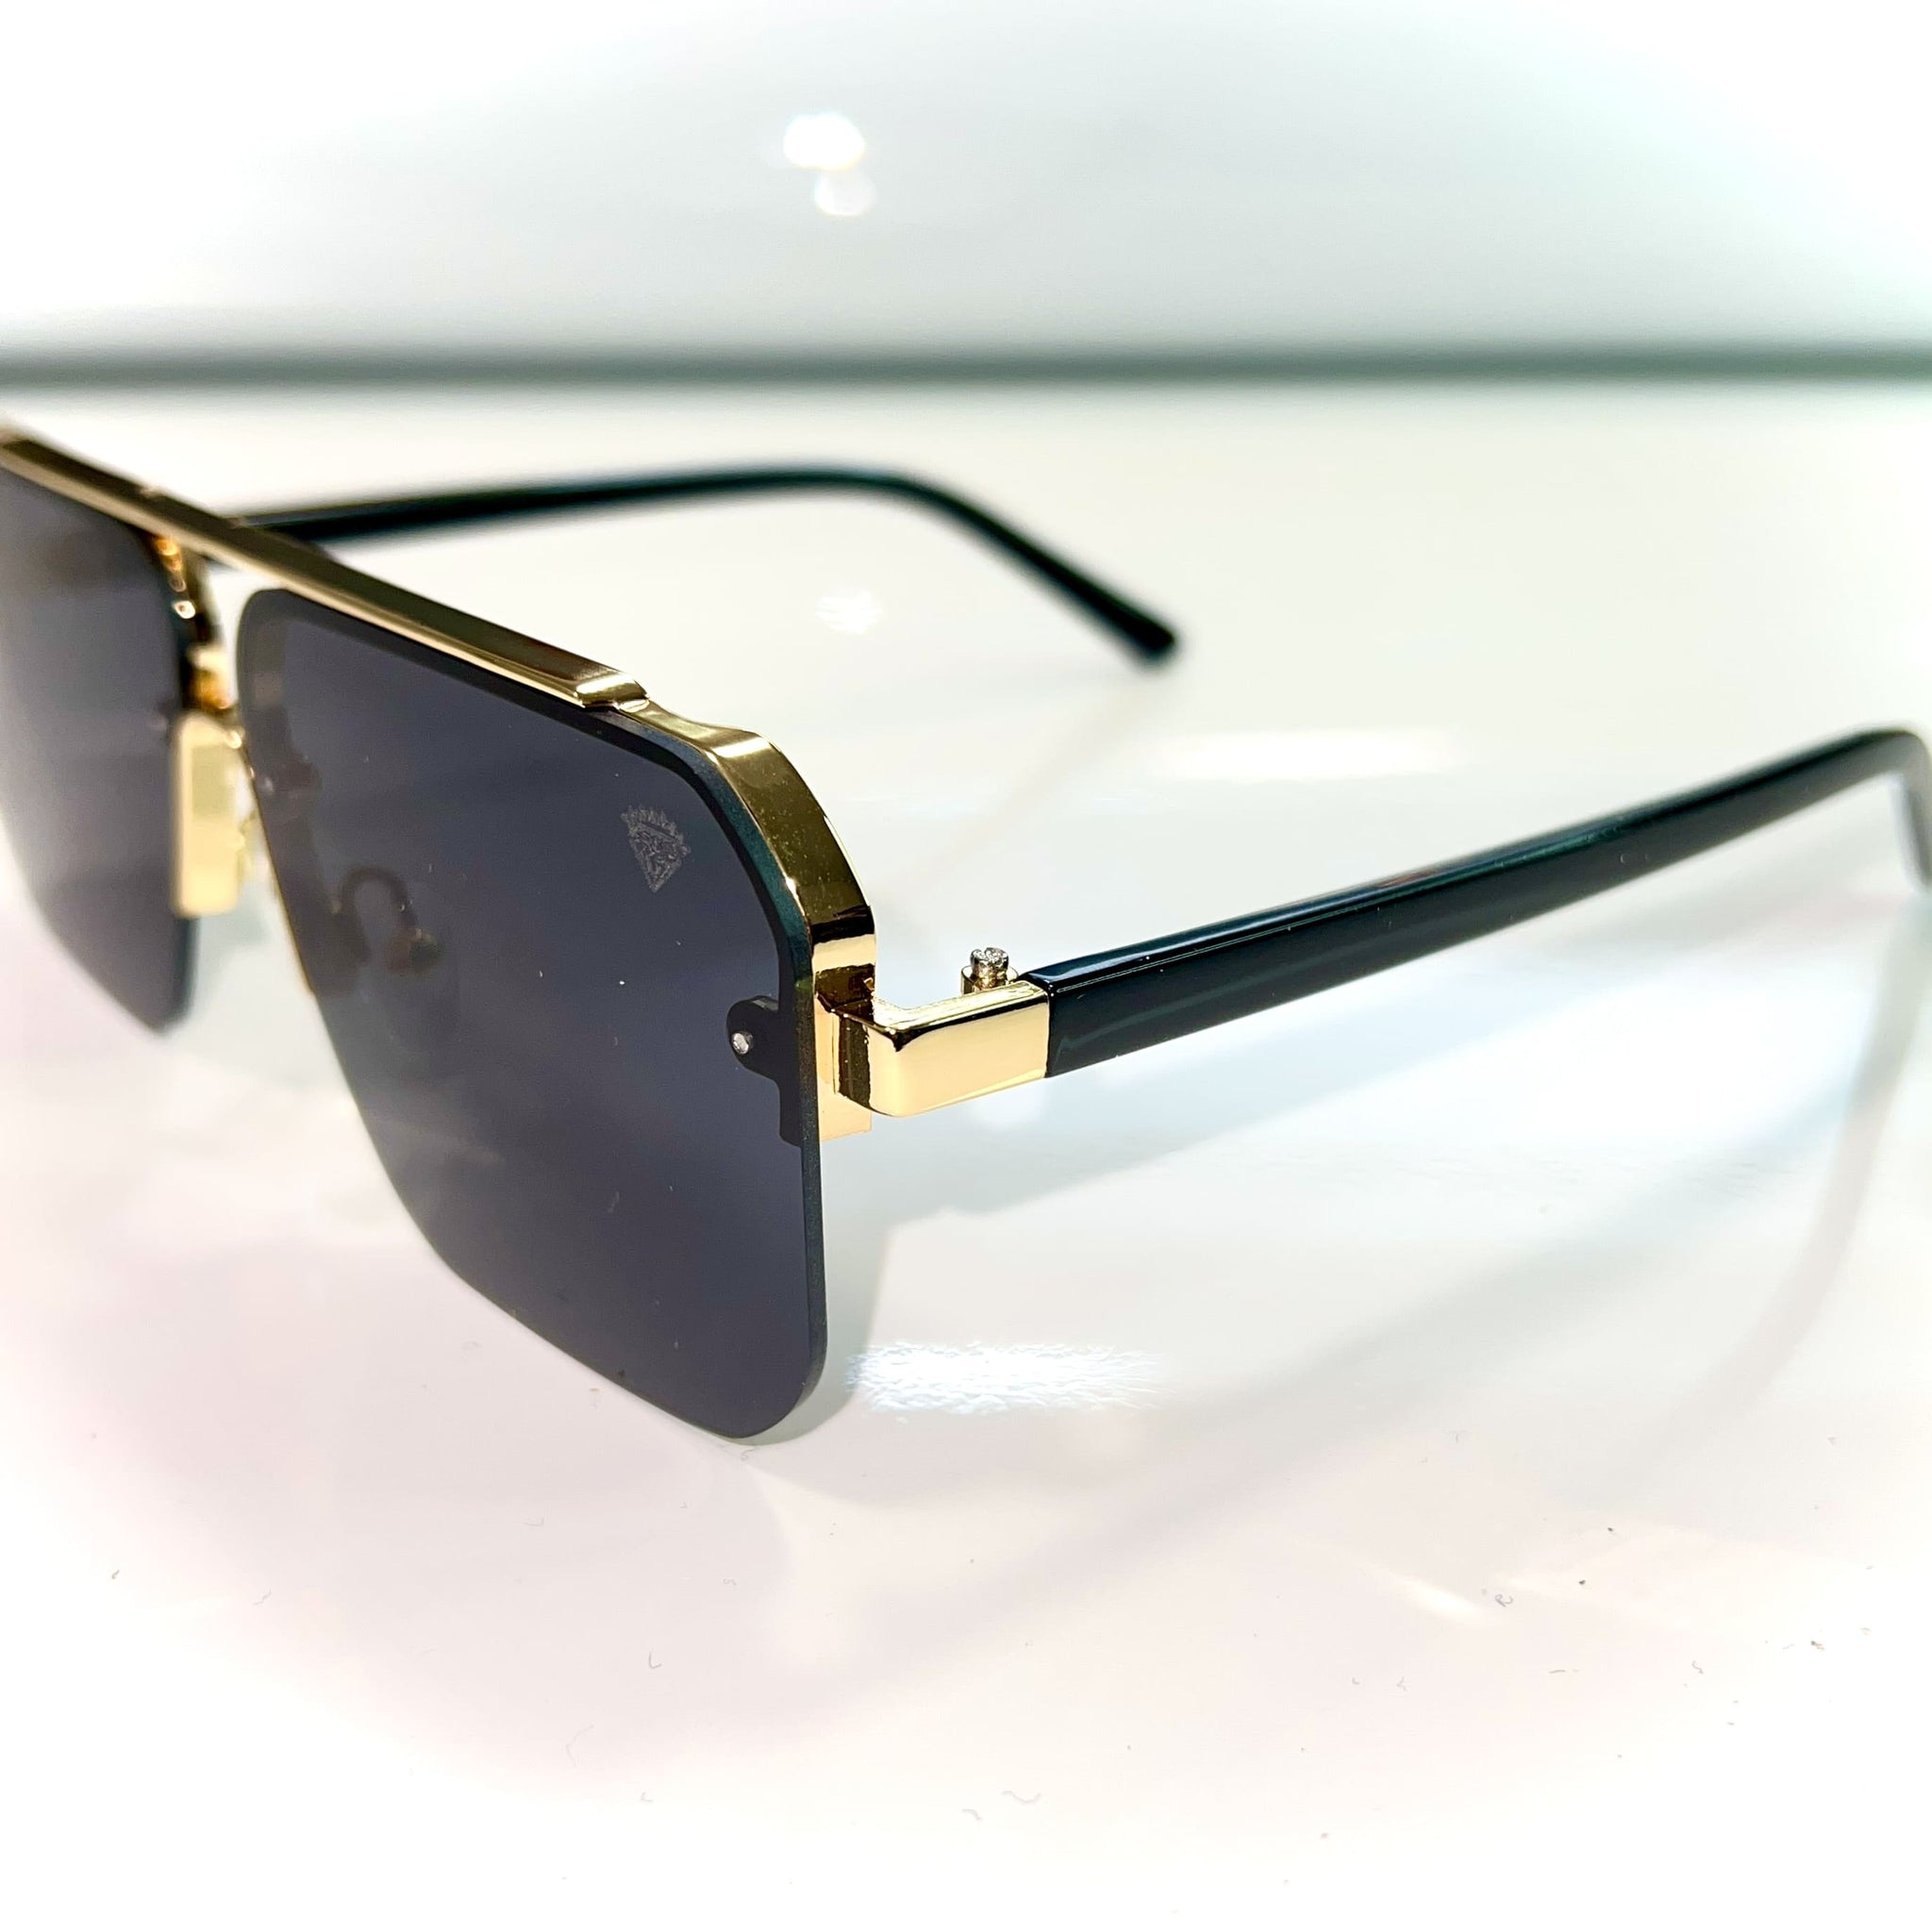 Macho Glasses - 14 carat gold plated / Silicon Side - Black Shade - Sehgal Glasses